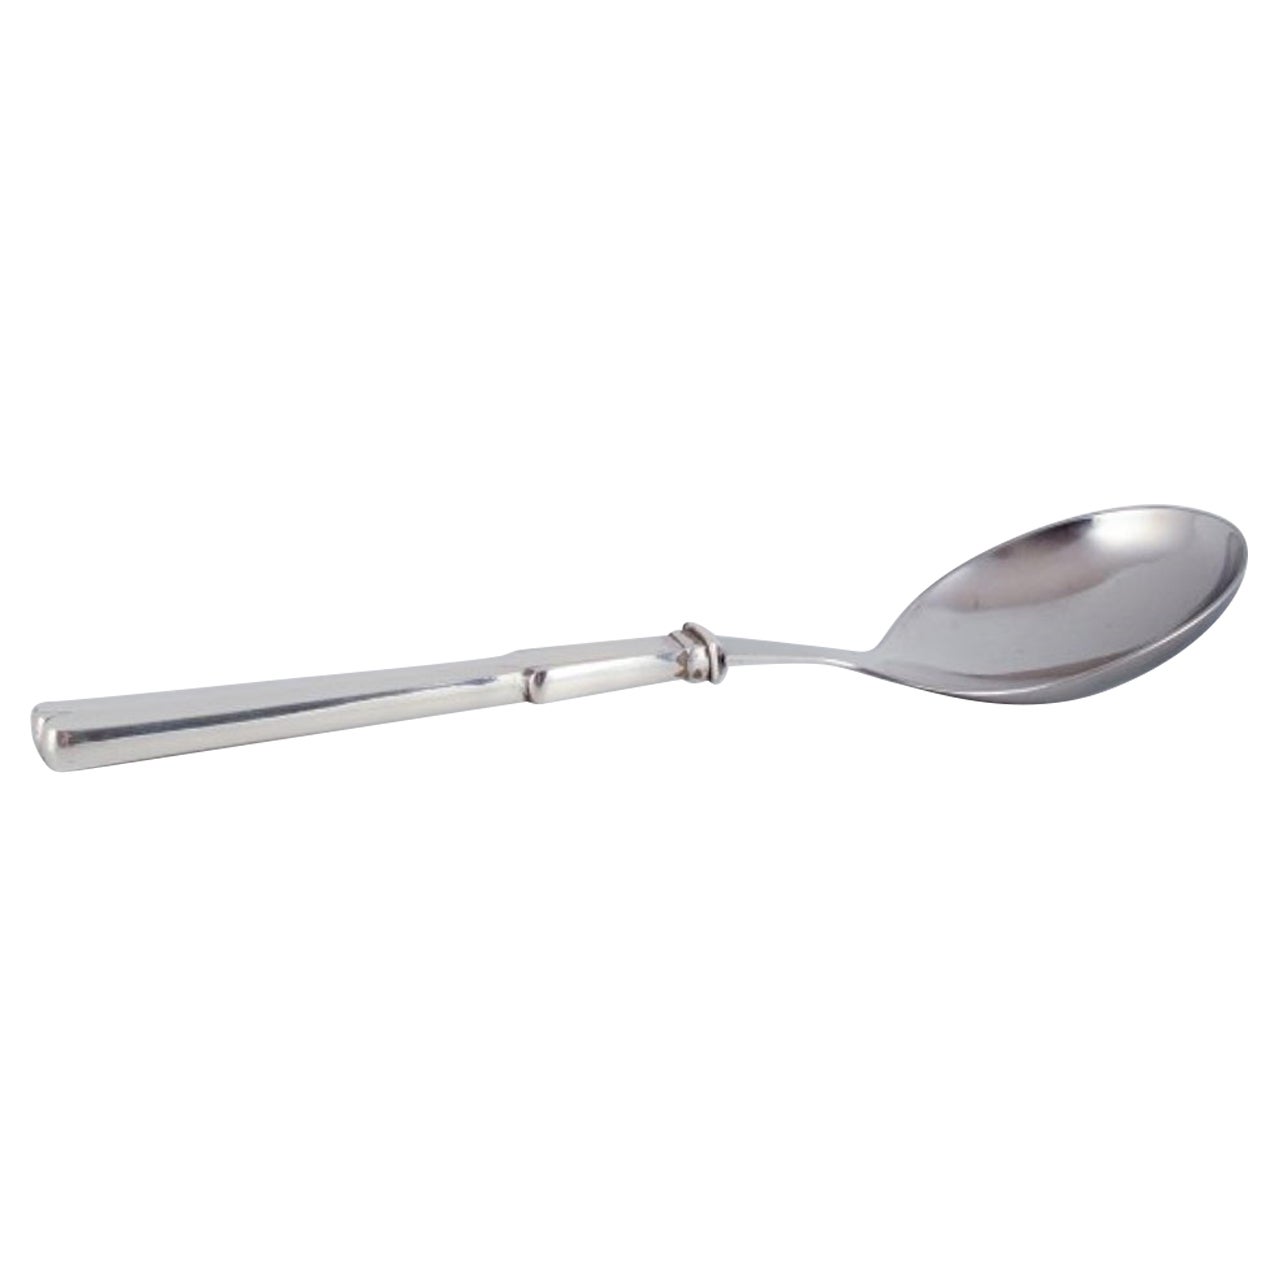 Hans Hansen. Art Deco serving spoon in sterling silver and stainless steel.